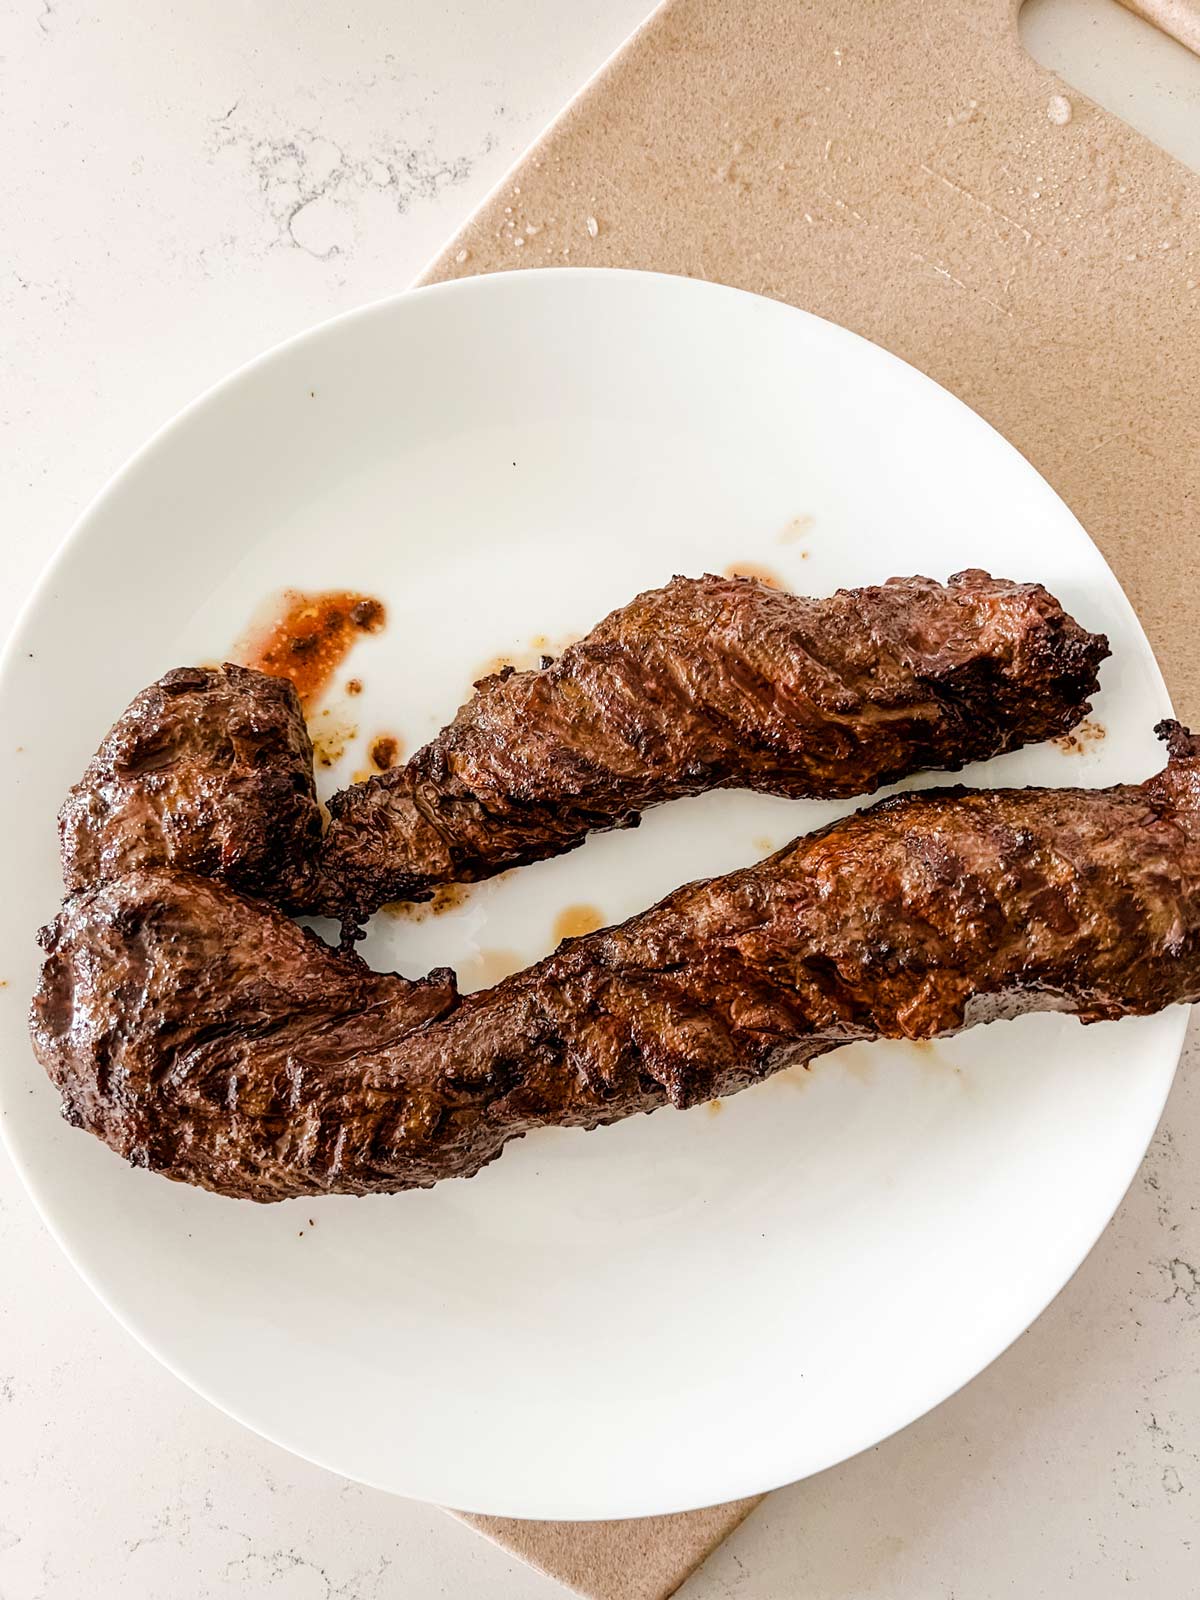 Photo of grilled steak resting on a white plate.